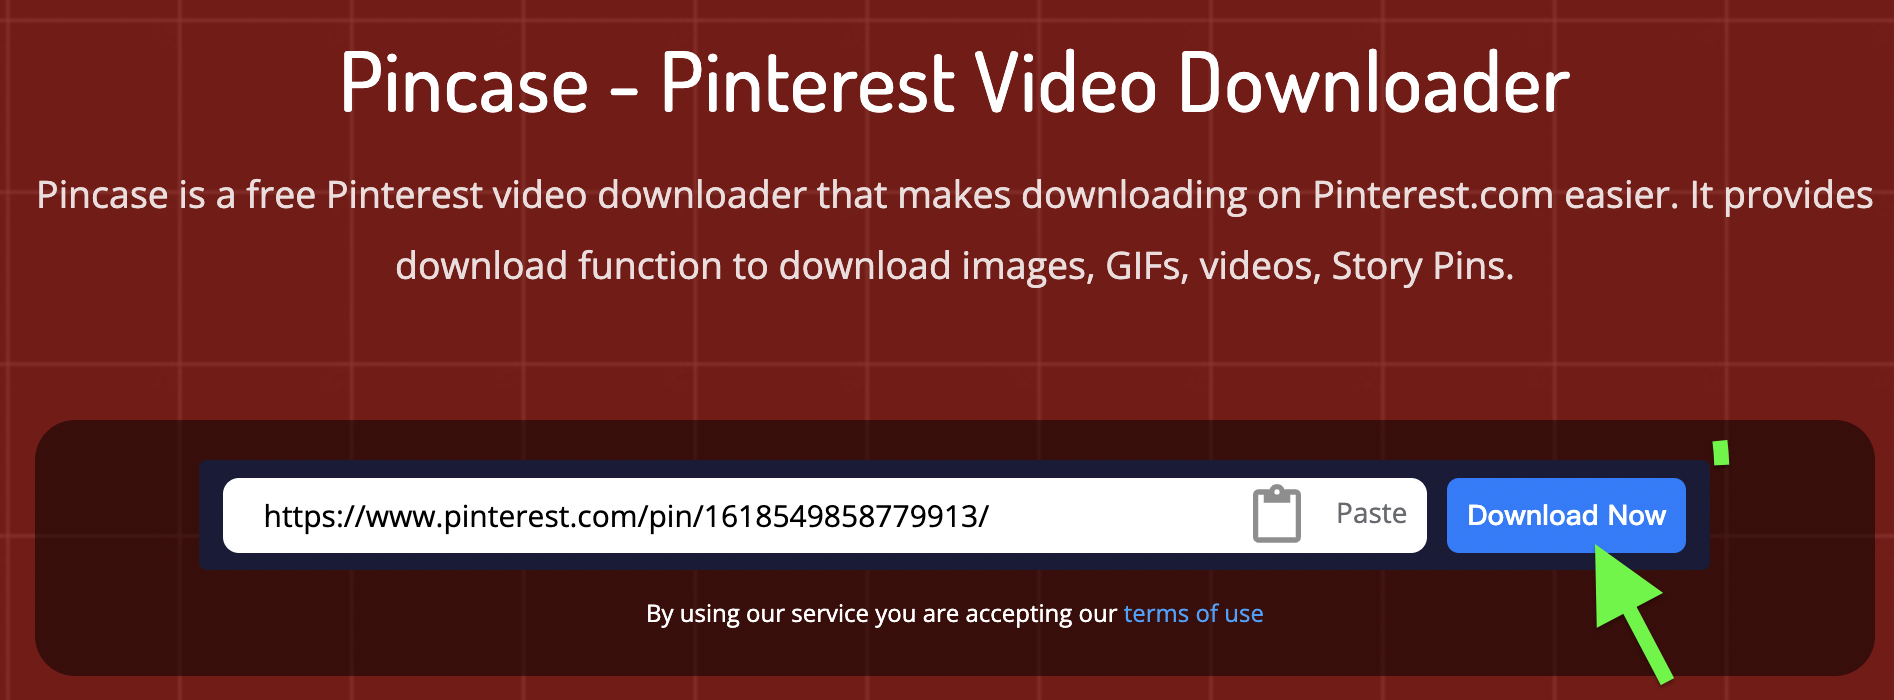 How to use Pincase Online Downloader? 